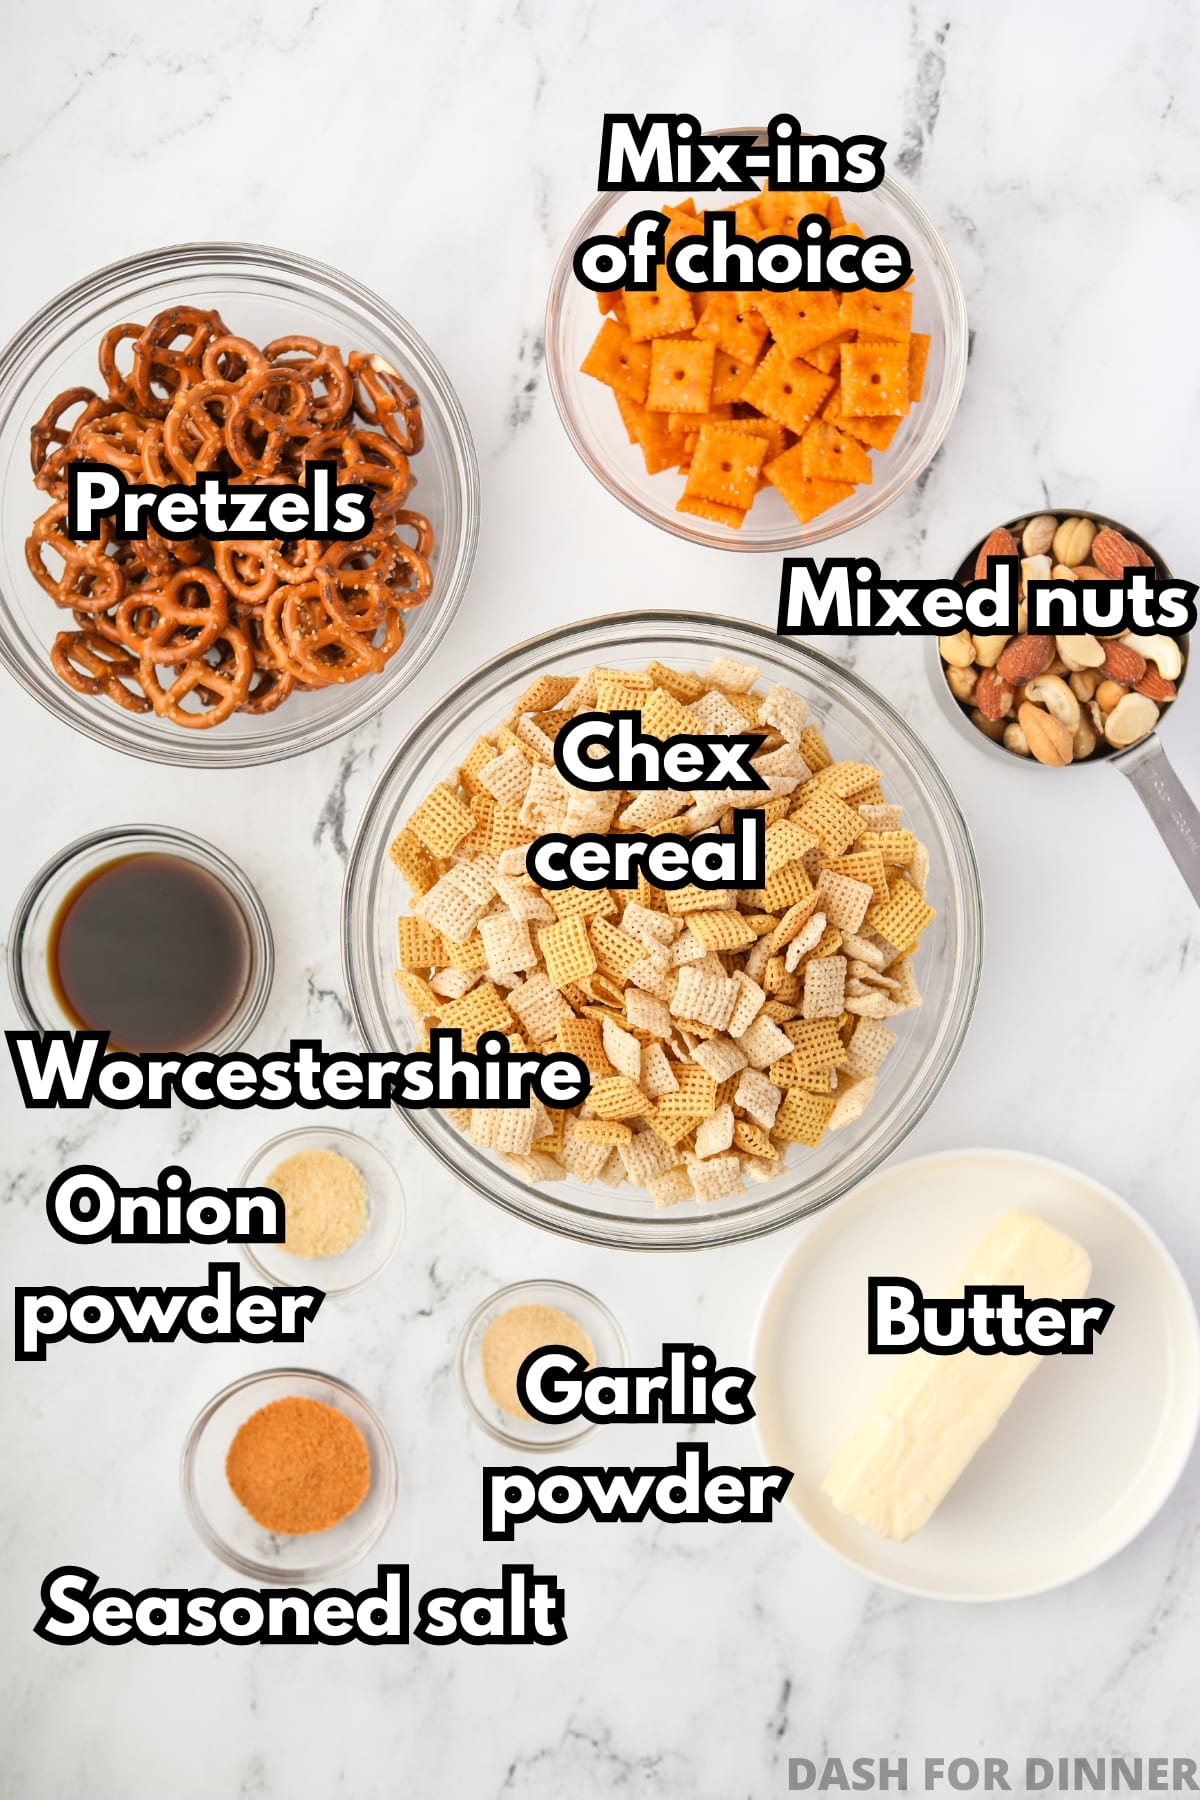 The ingredients needed to make chex mix: cheese crackers, cereal, nuts, butter, worcestershire sauce, seasonings, etc.